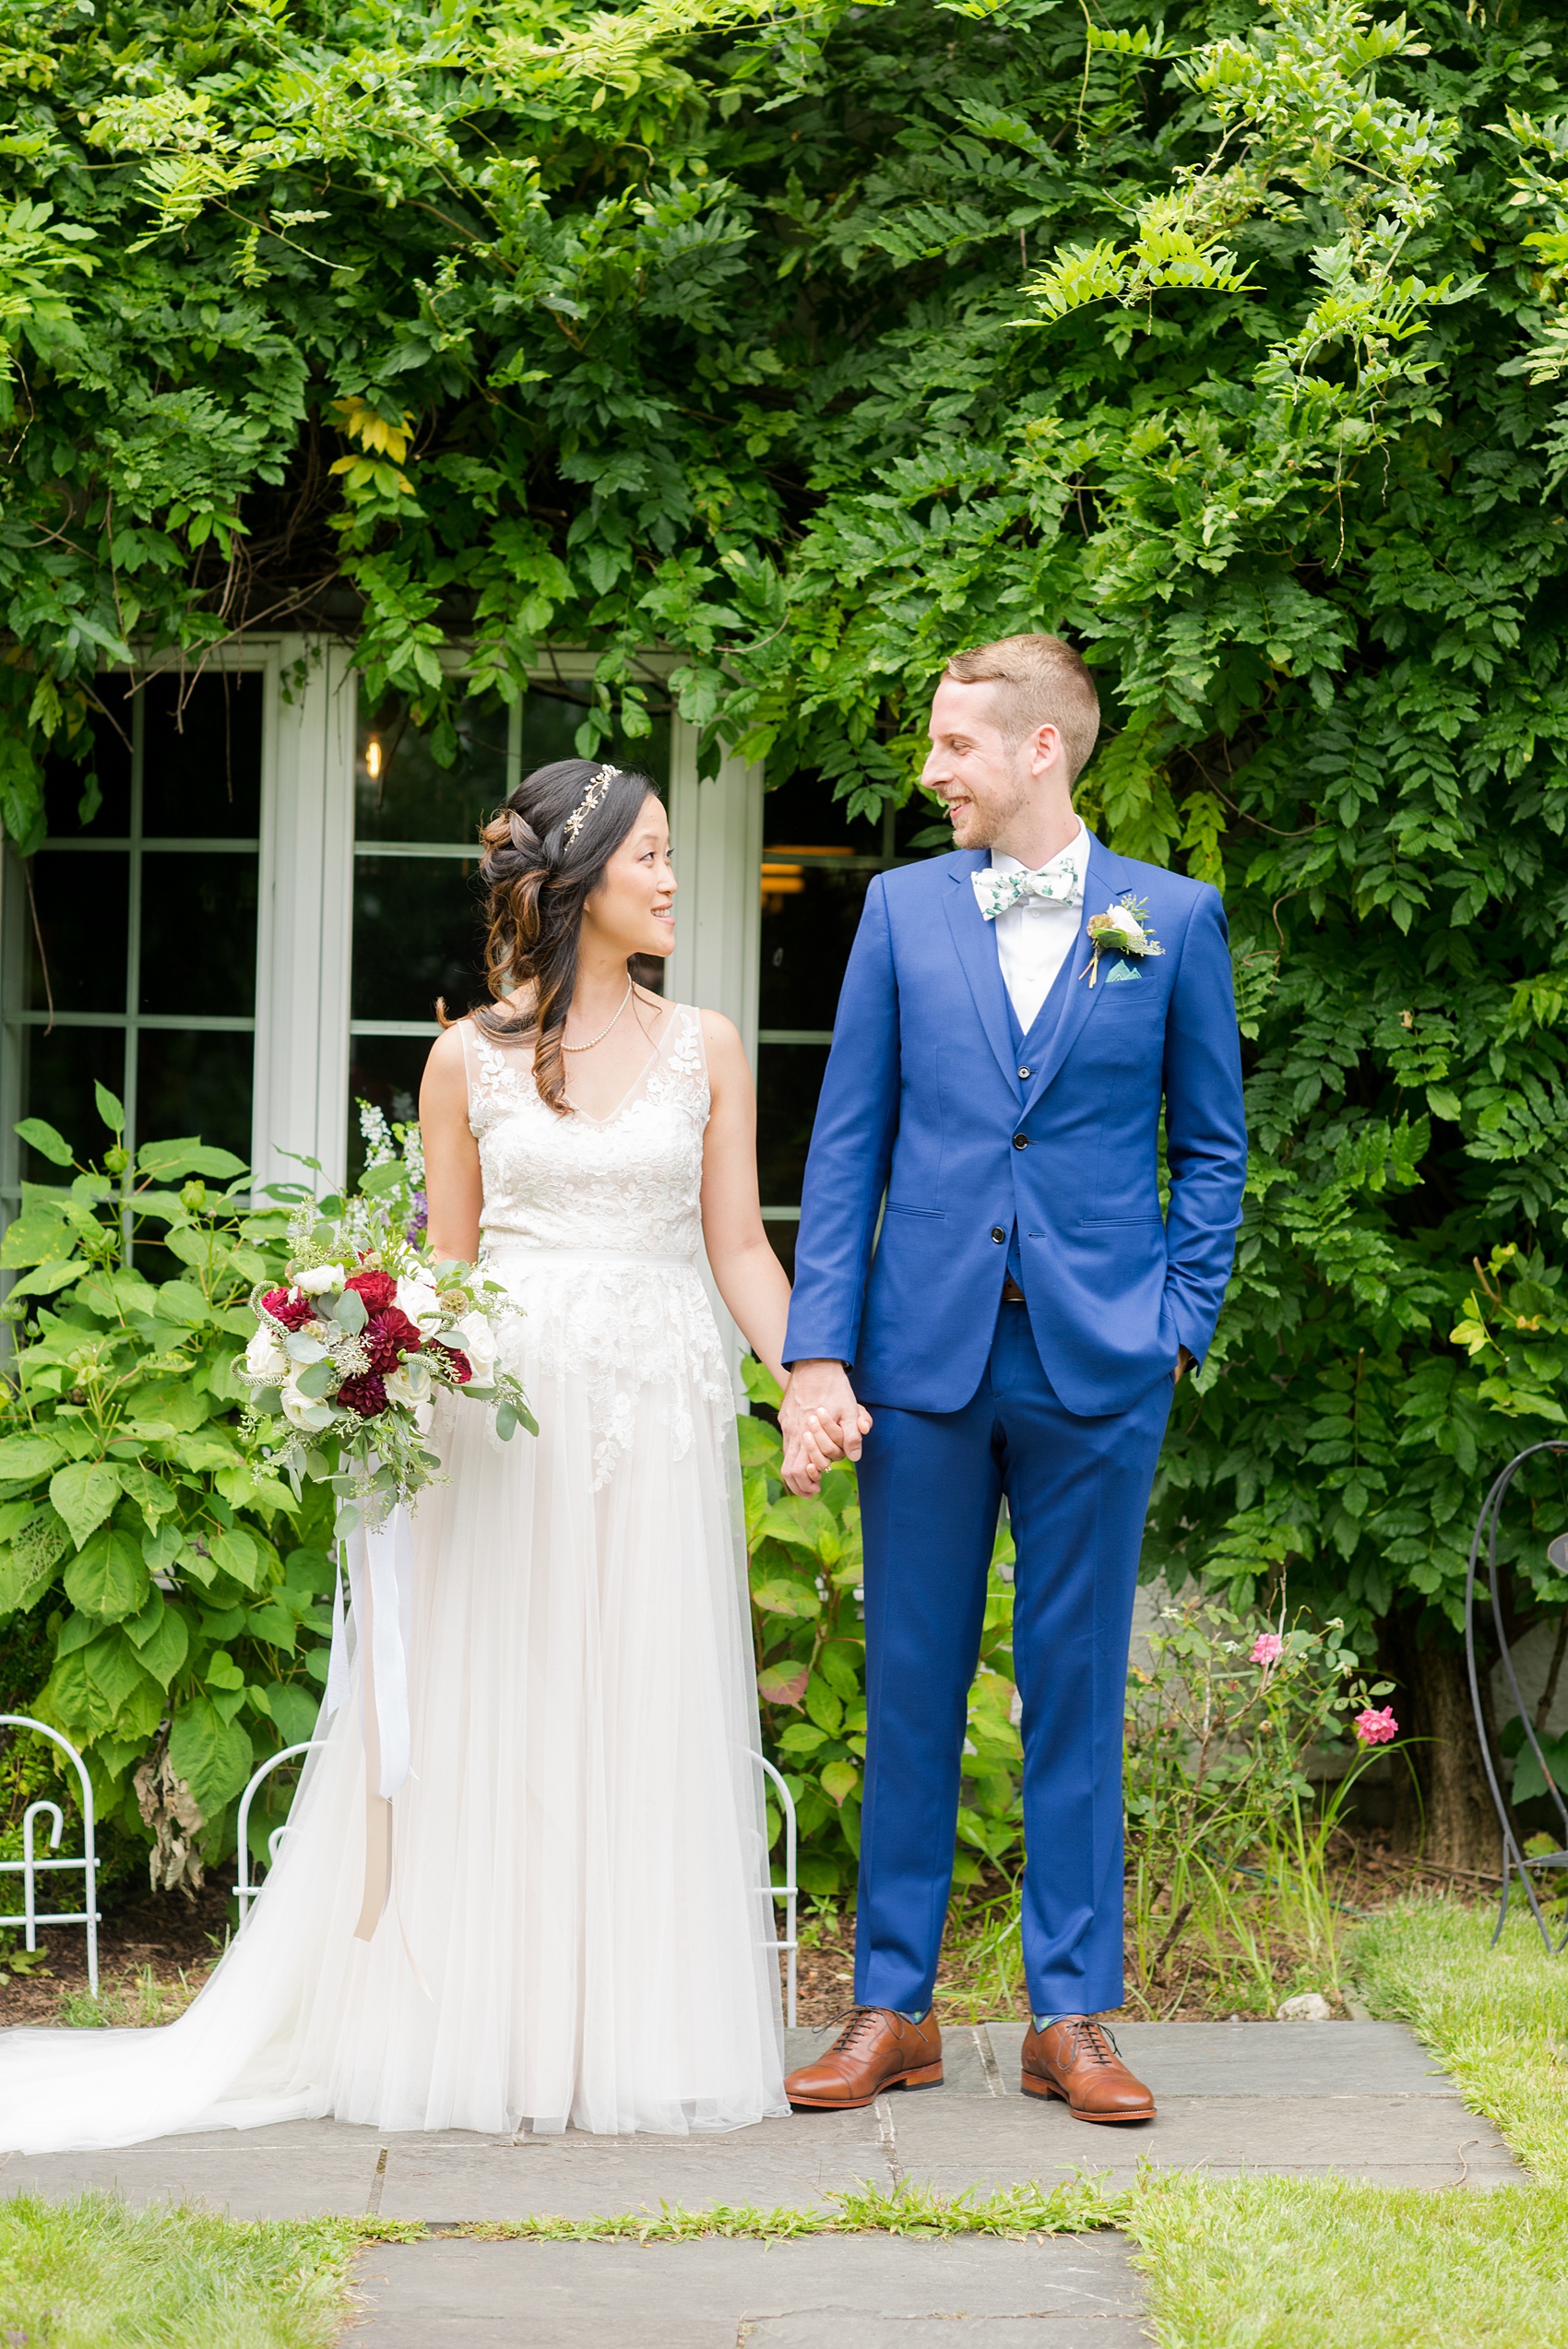 Wedding photos at Crabtree's Kittle House in Chappaqua, New York by Mikkel Paige Photography. This venue in Westchester county has the perfect elegance of a rustic home and garden very close to NYC. The bride wore a gown from BHLDN and groom a custom blue Indochino suit. #bluesuit #BHLDNgown #mikkelpaige #CrabtreesKittleHouse #WestchesterWeddingVenues #WestchesterWedding #summerwedding 